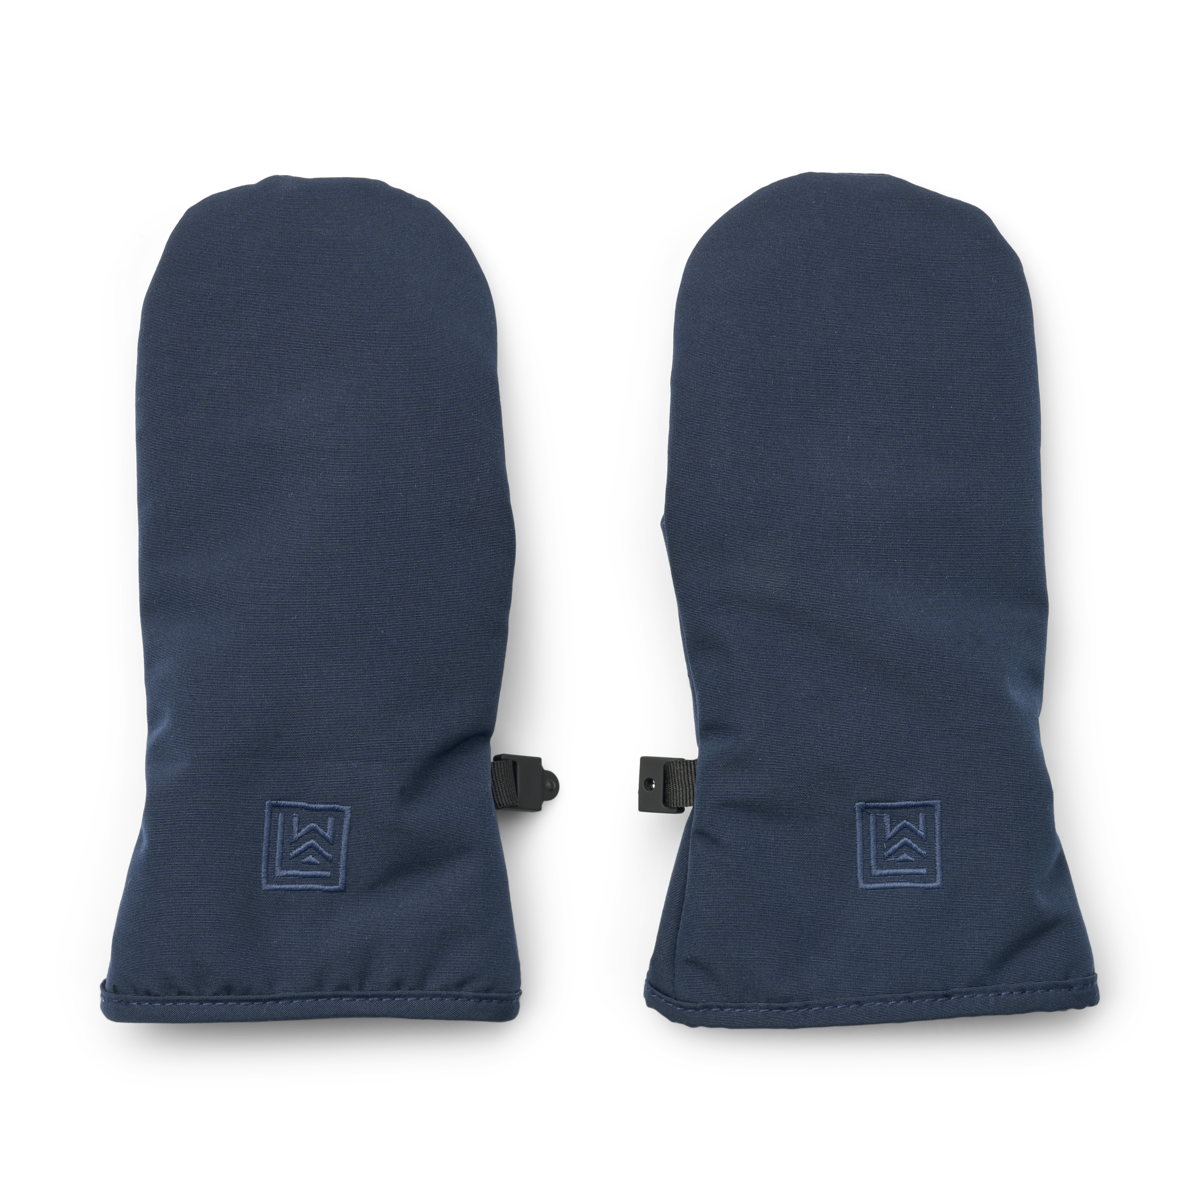 Liewood Hakon Insulated Gloves - Classic Navy